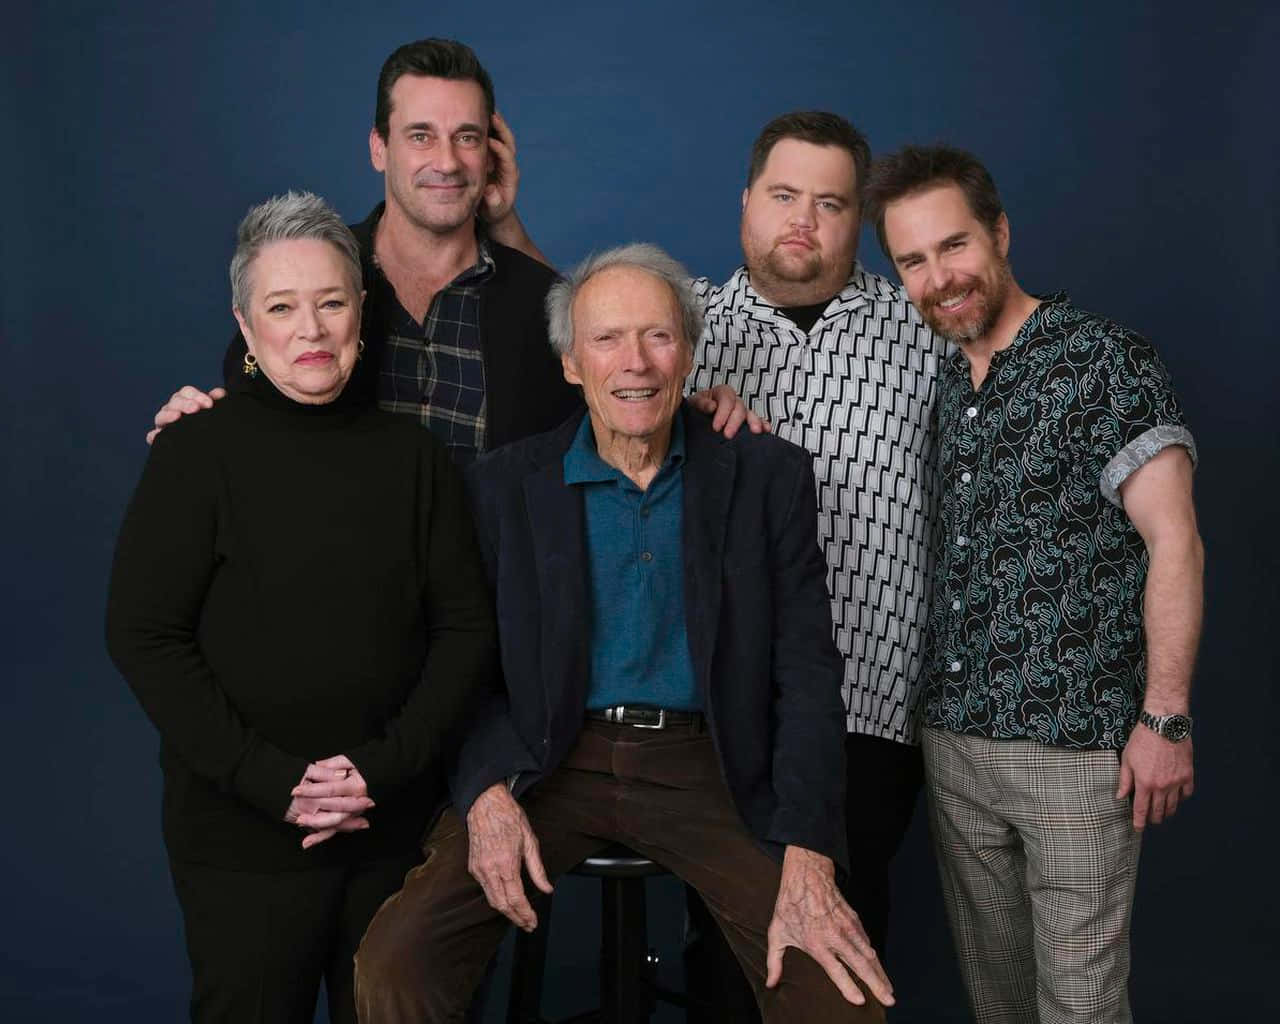 Sam Rockwell Clint Eastwood Group Photography Wallpaper